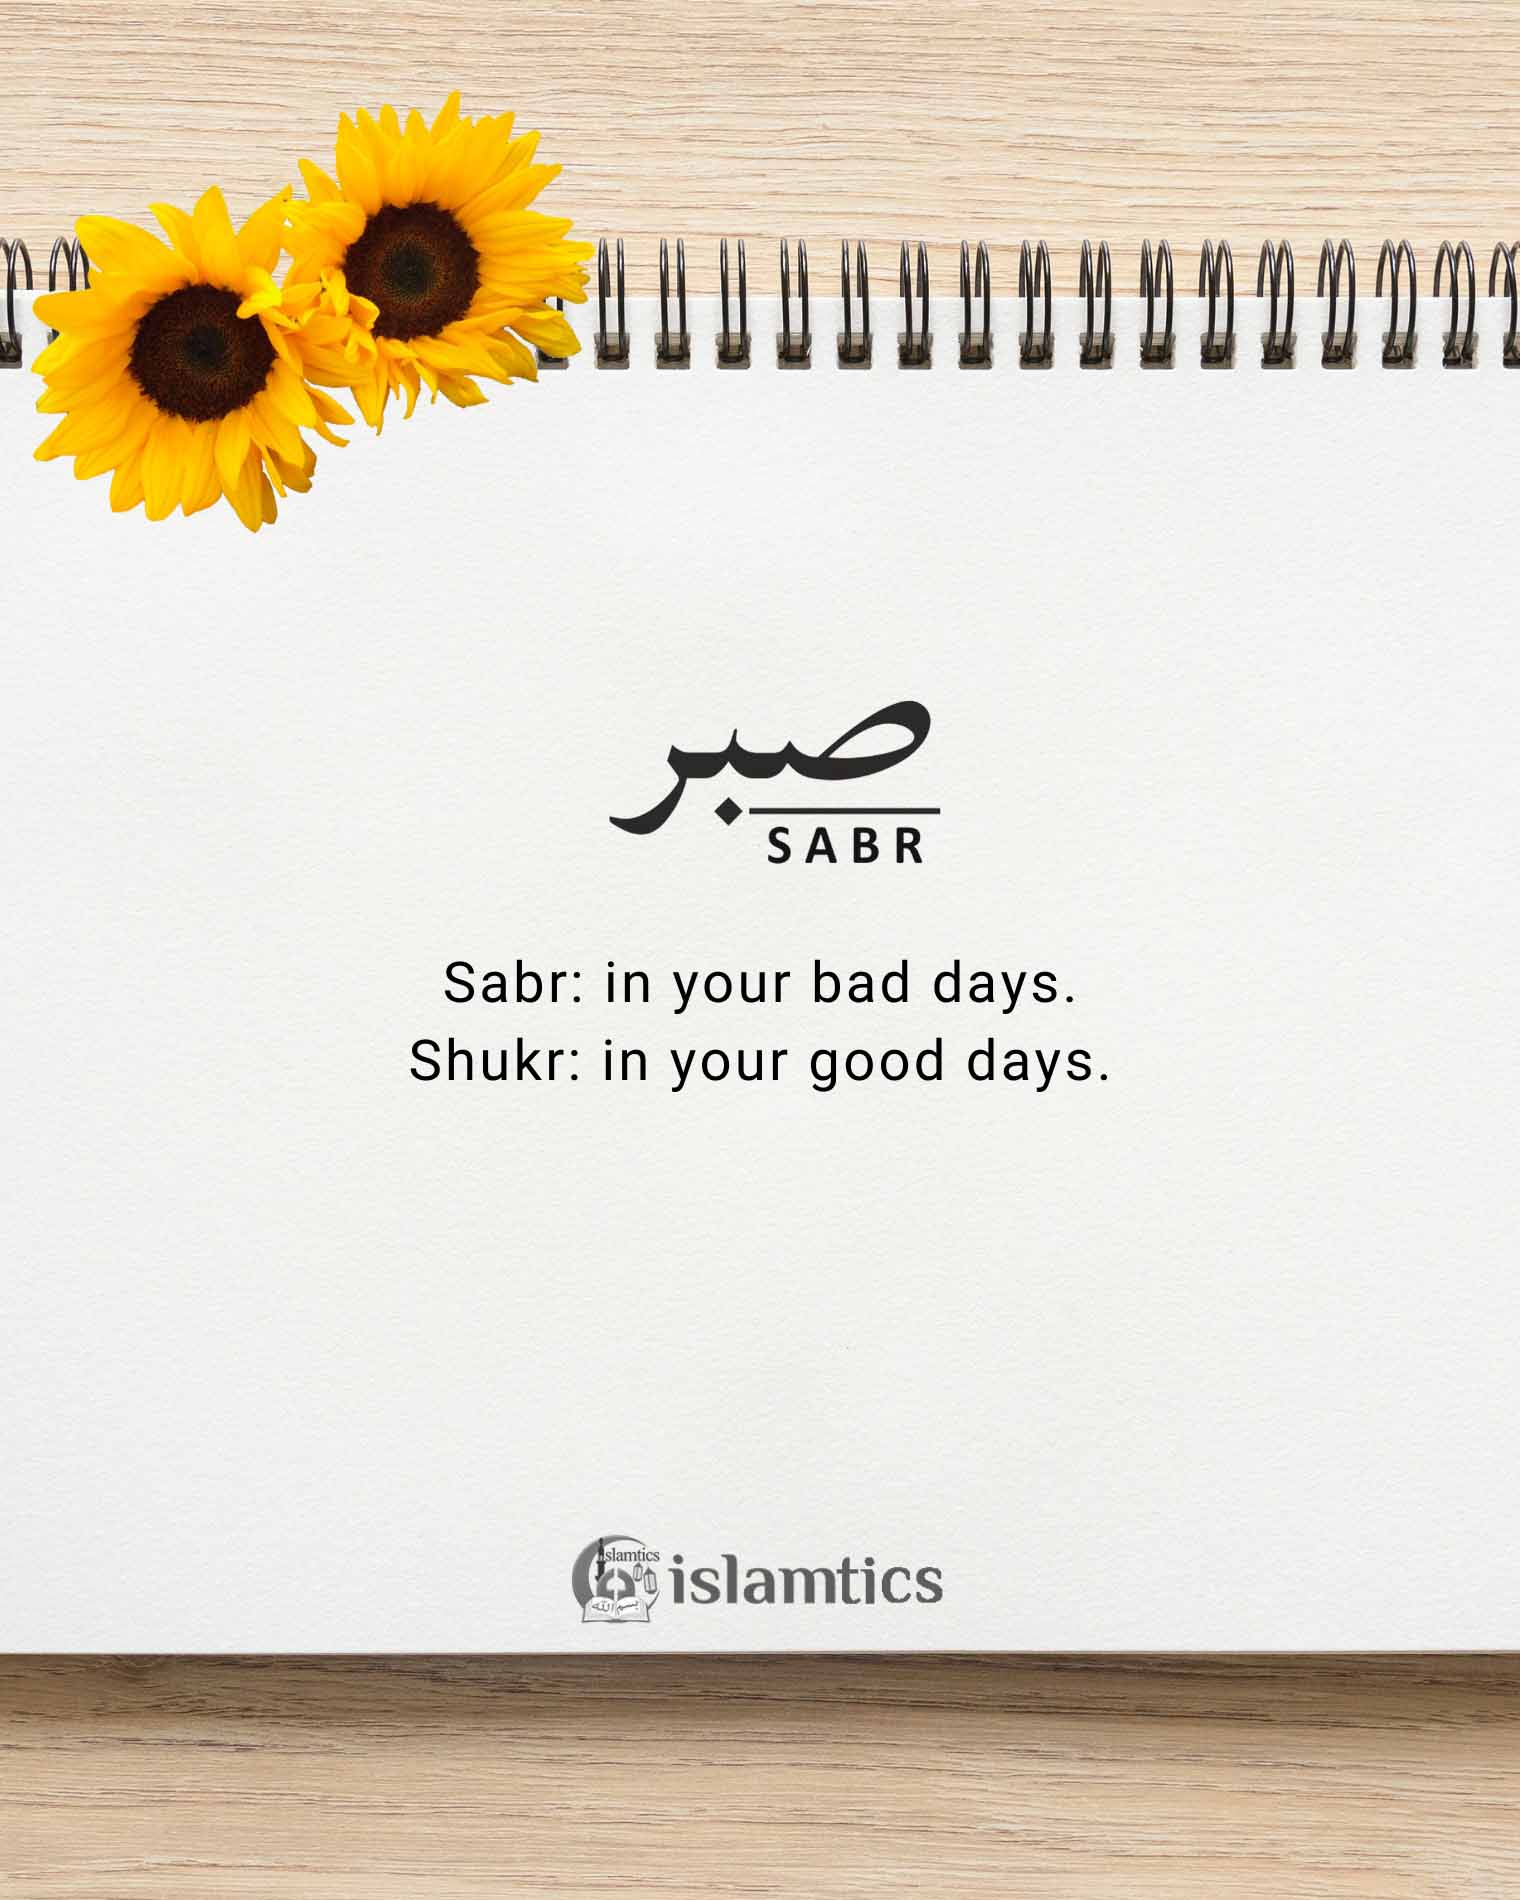  Sabr: in your bad days. Shukr: in your good days.